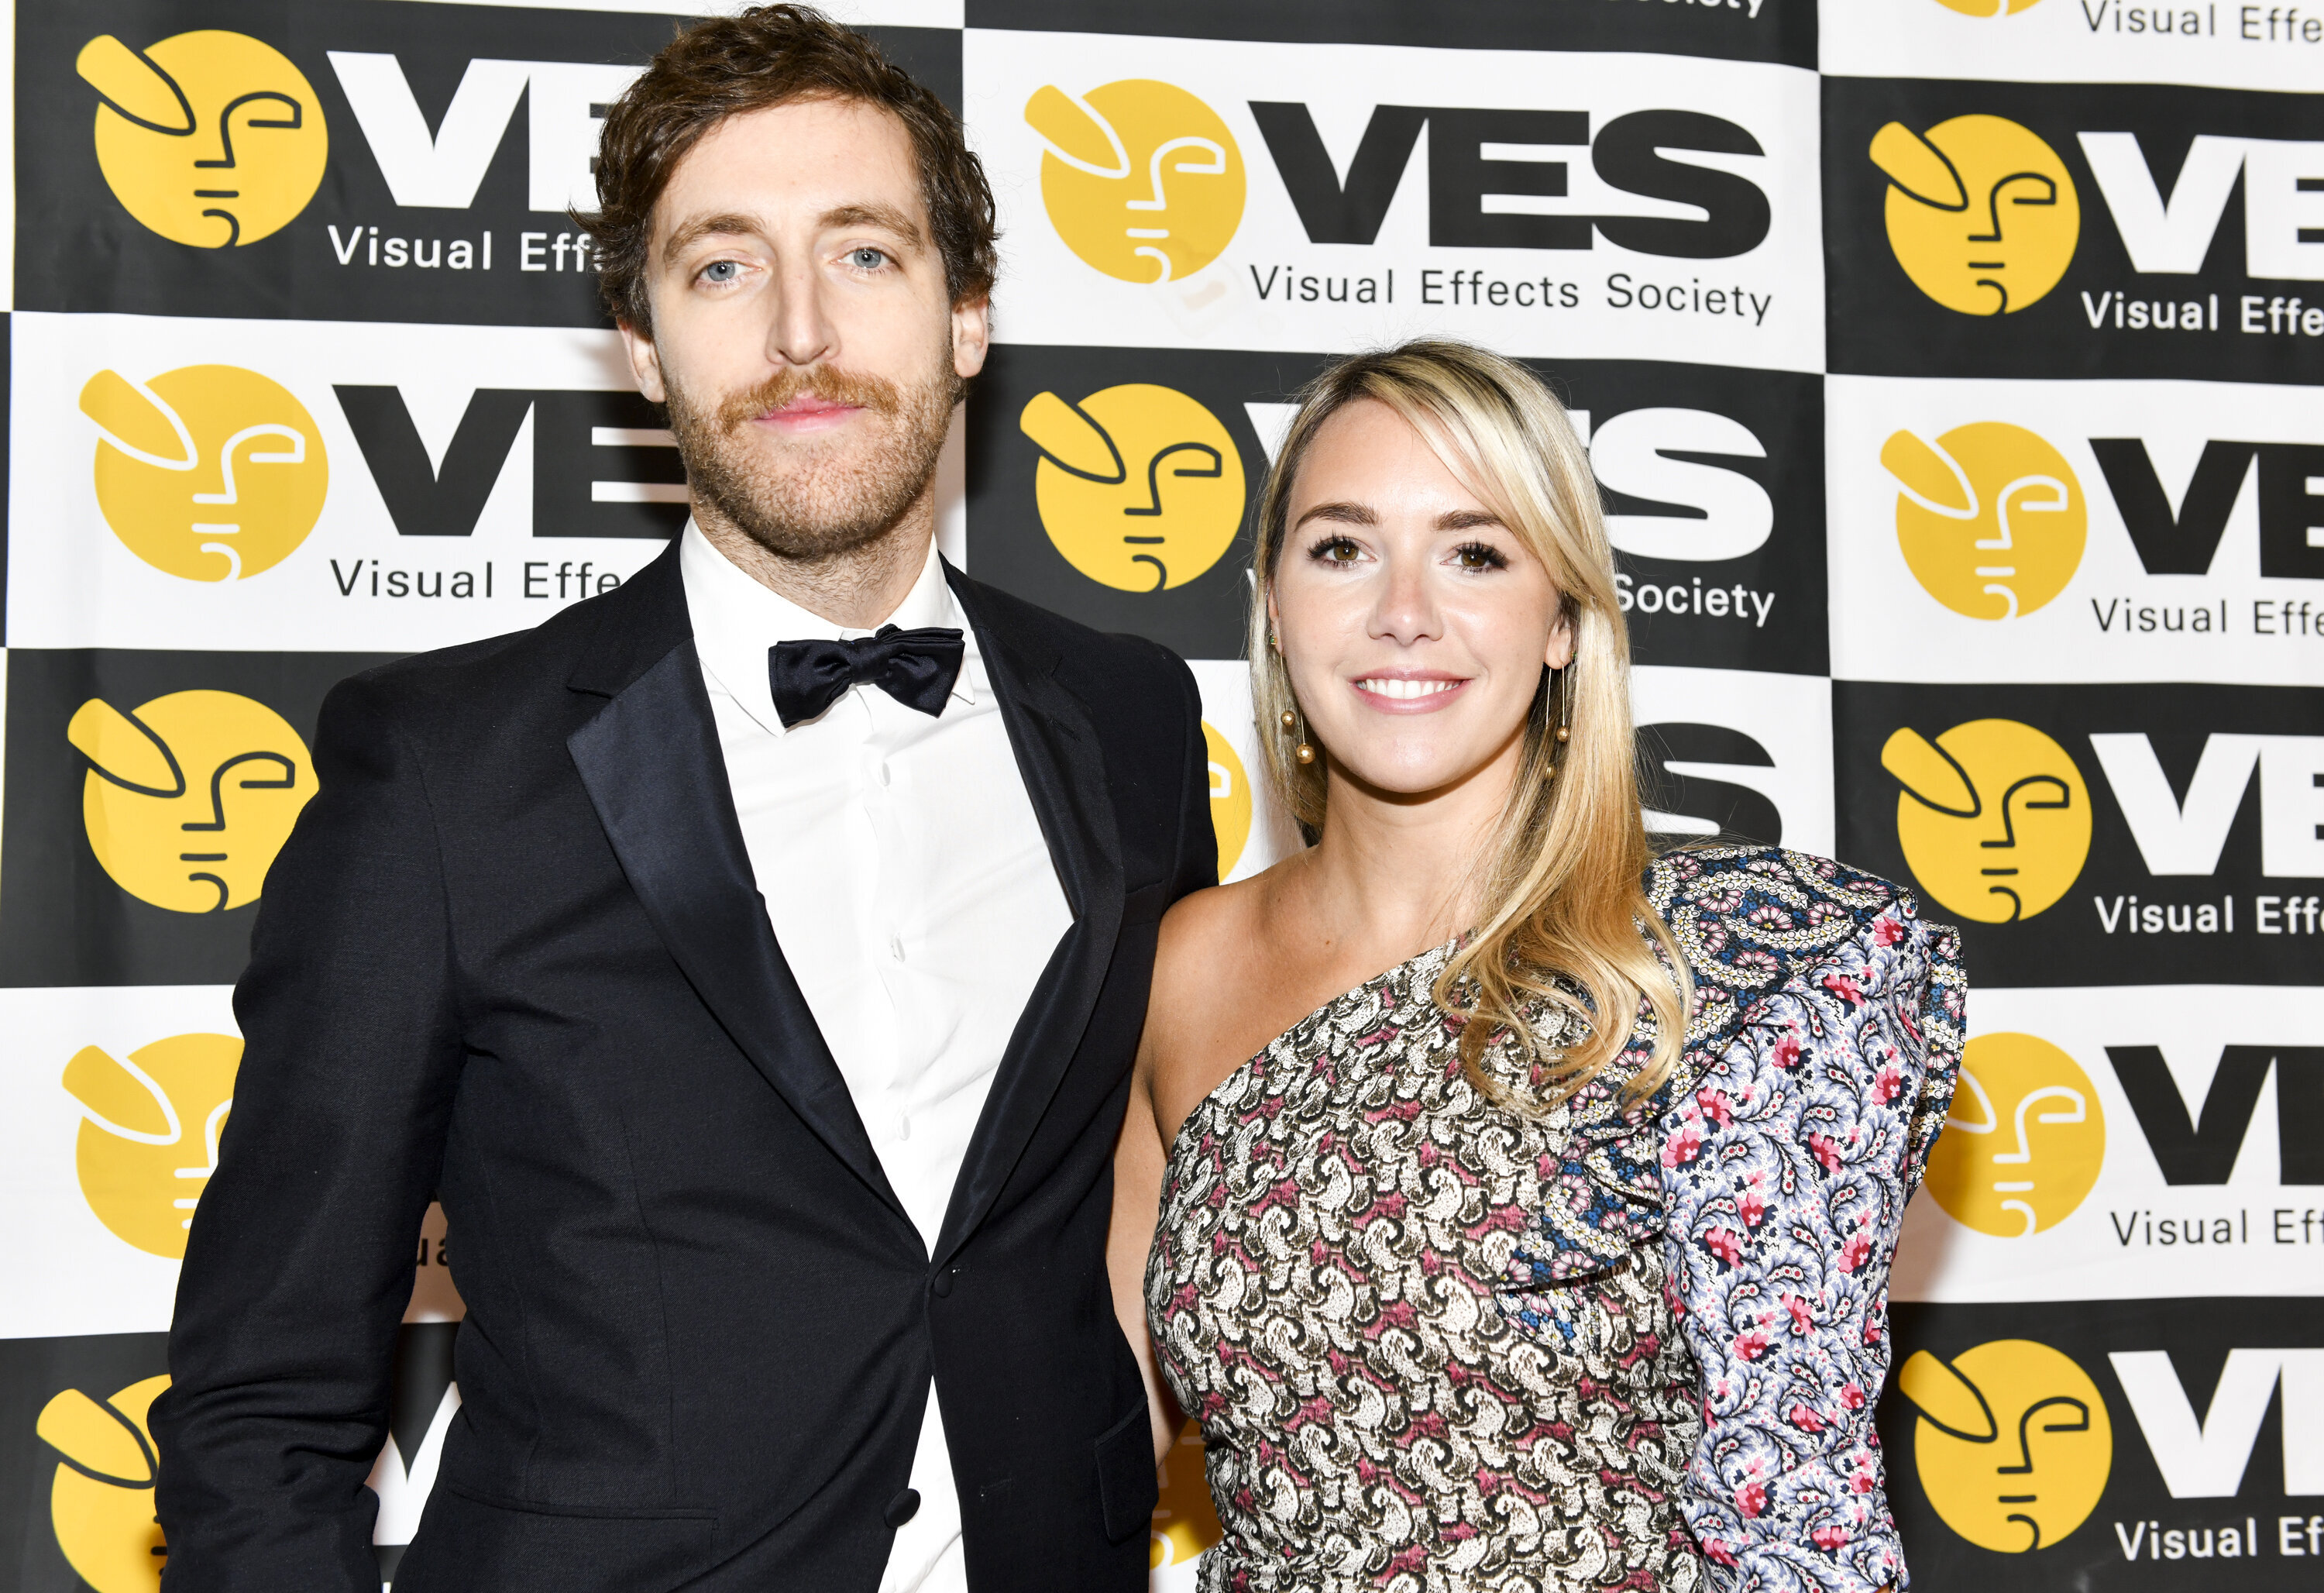 Silicon Valley Star Thomas Middleditch Says Swinging Has Saved Our Marriage HuffPost Entertainment pic